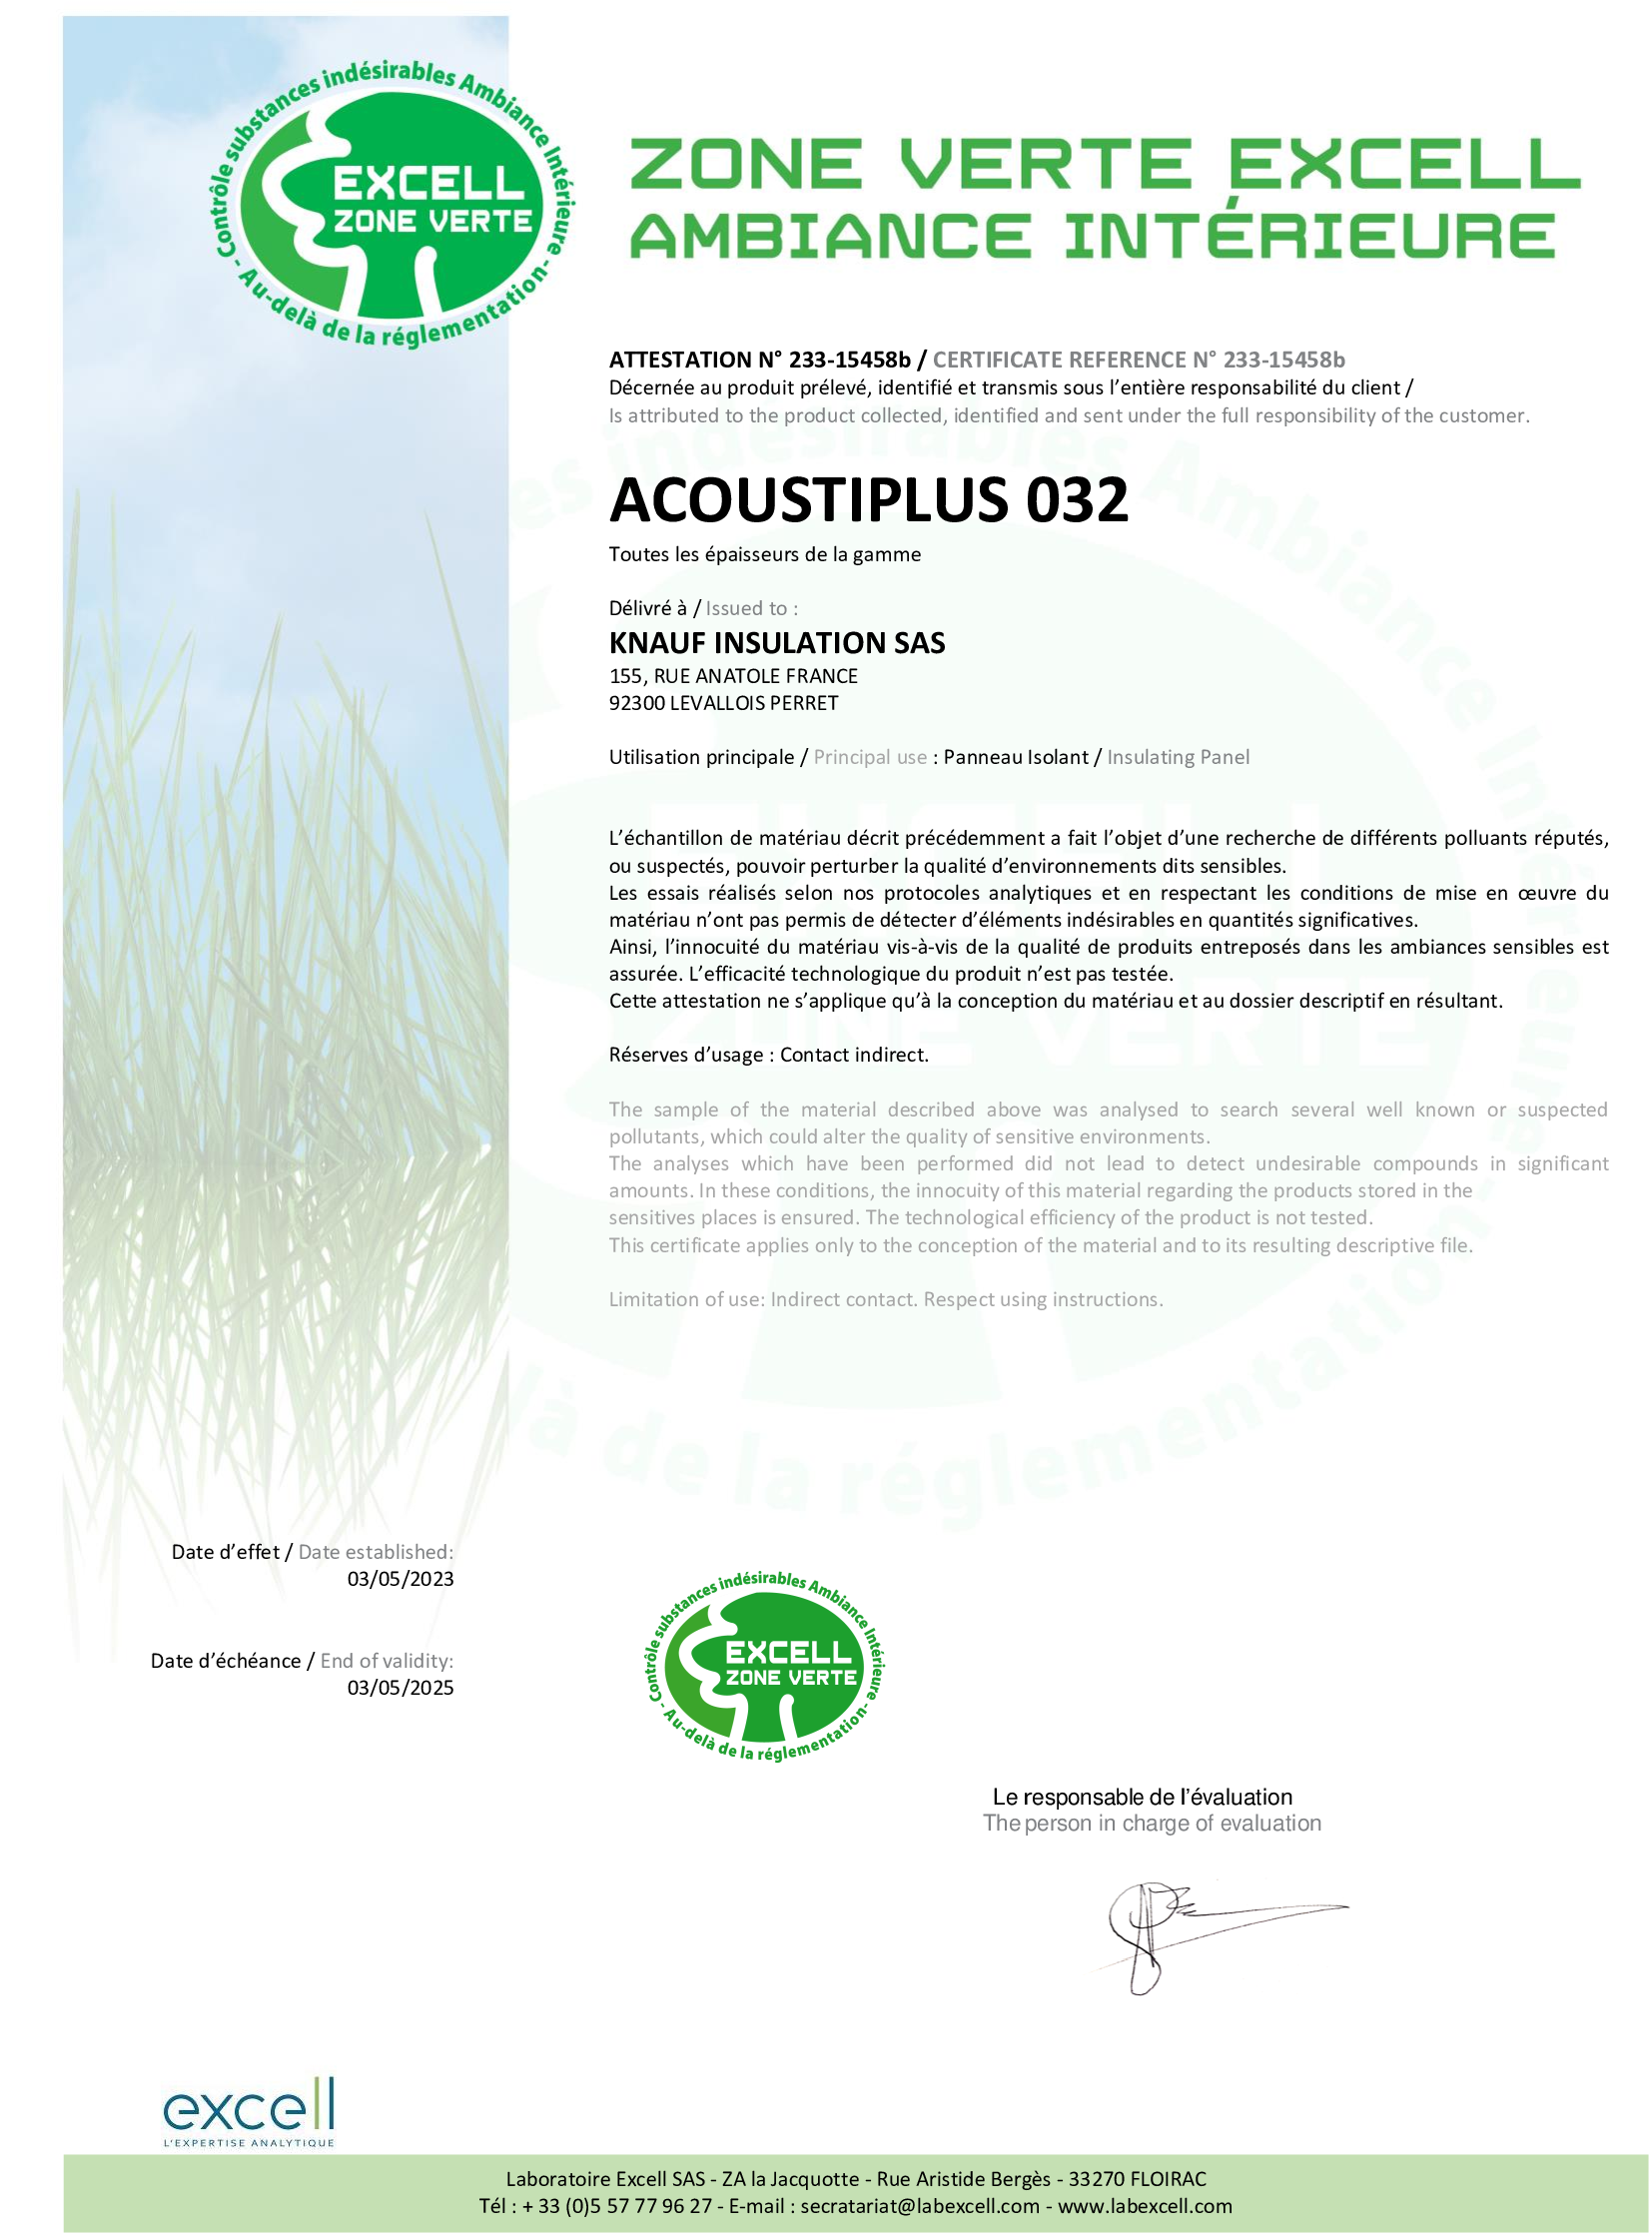 Label Excell Acoustiplus 032